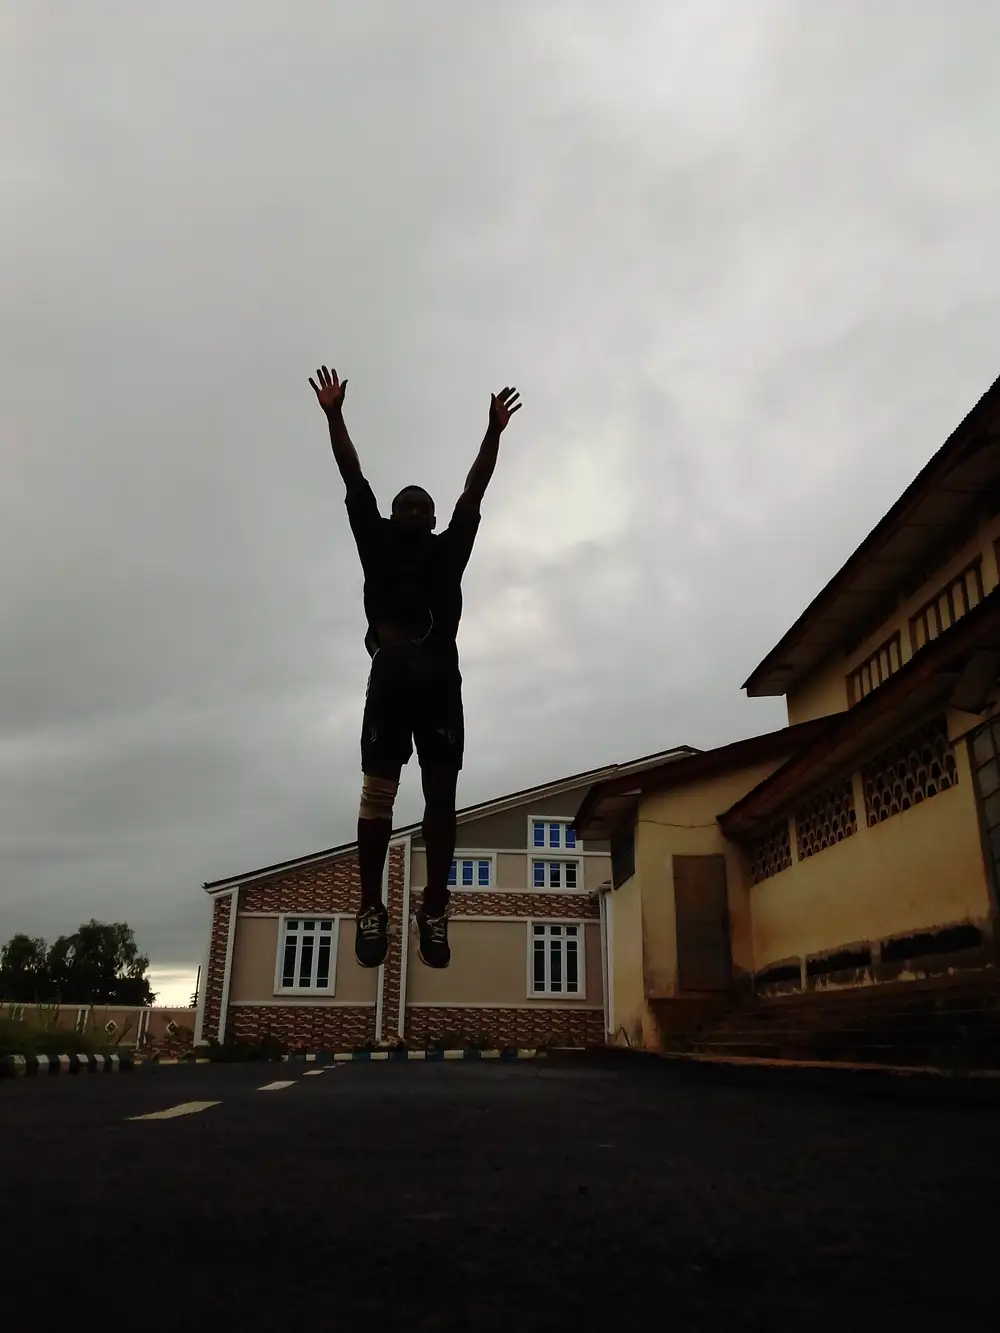 A Man jumping with hands raised